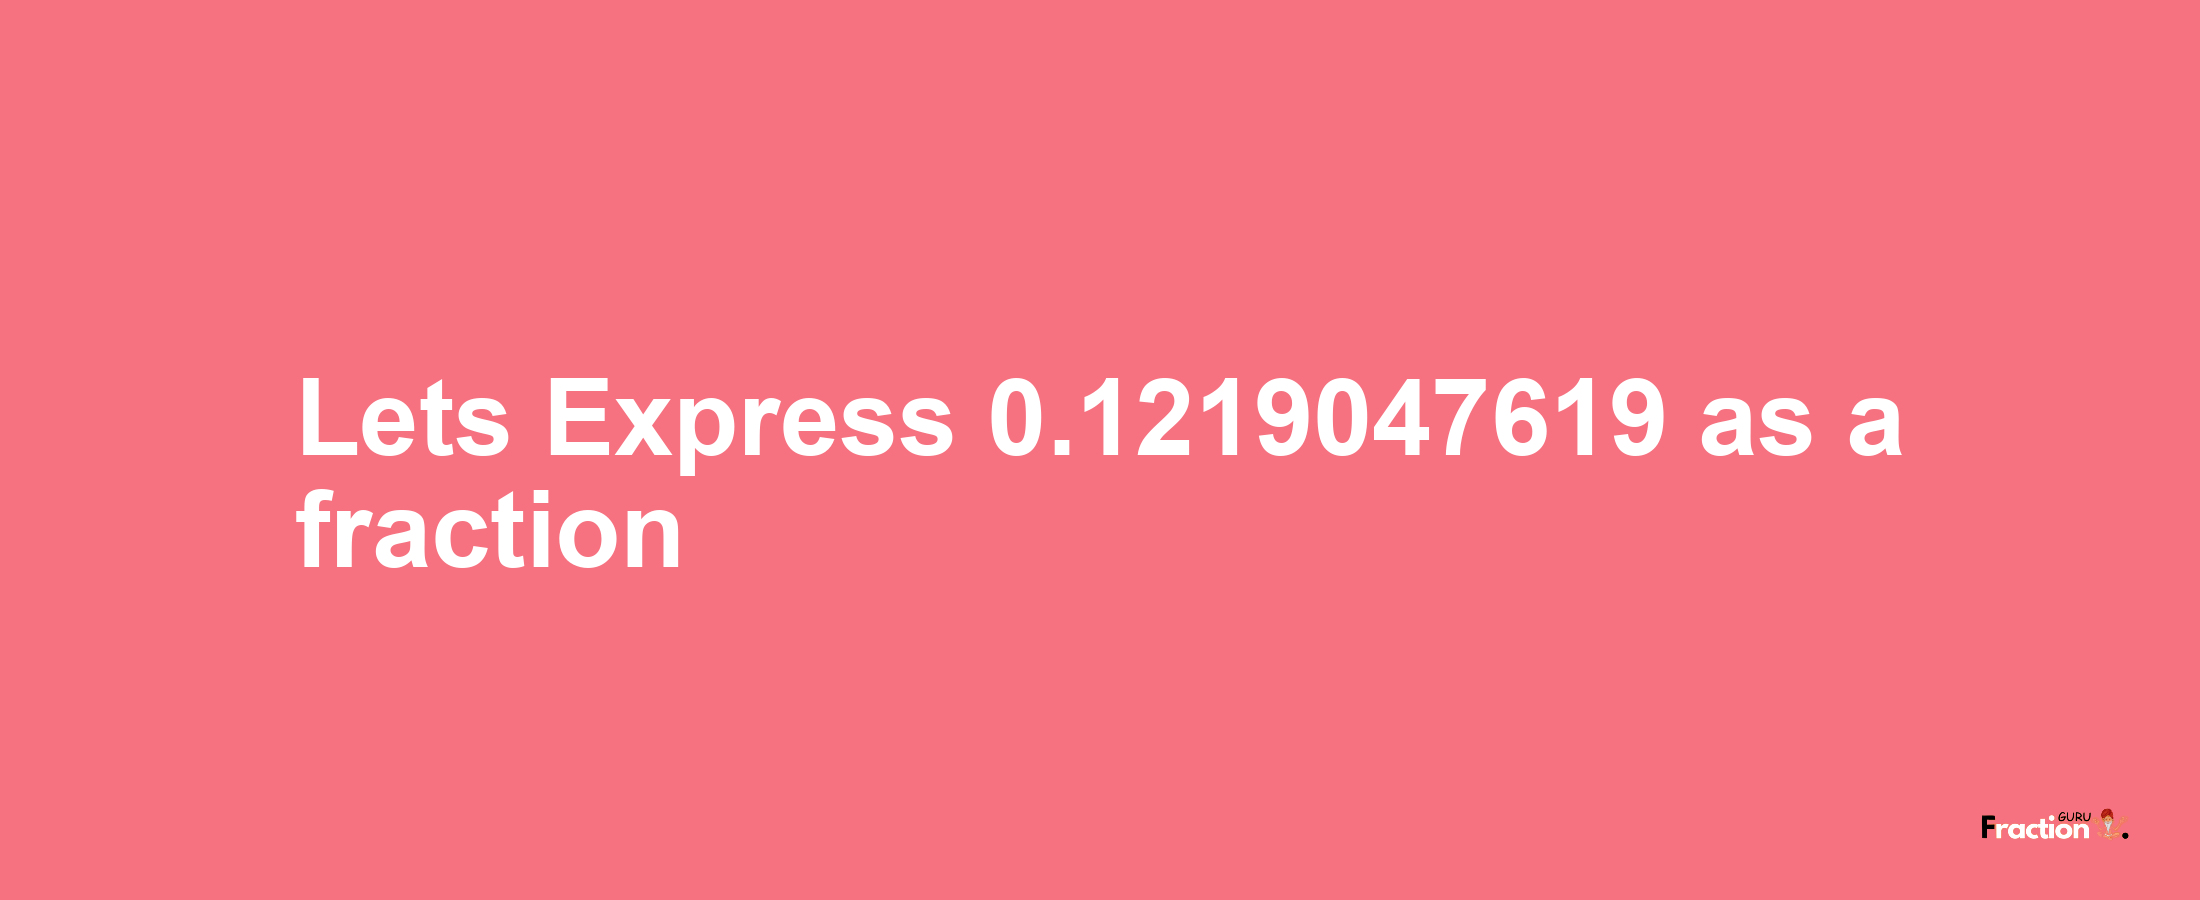 Lets Express 0.1219047619 as afraction